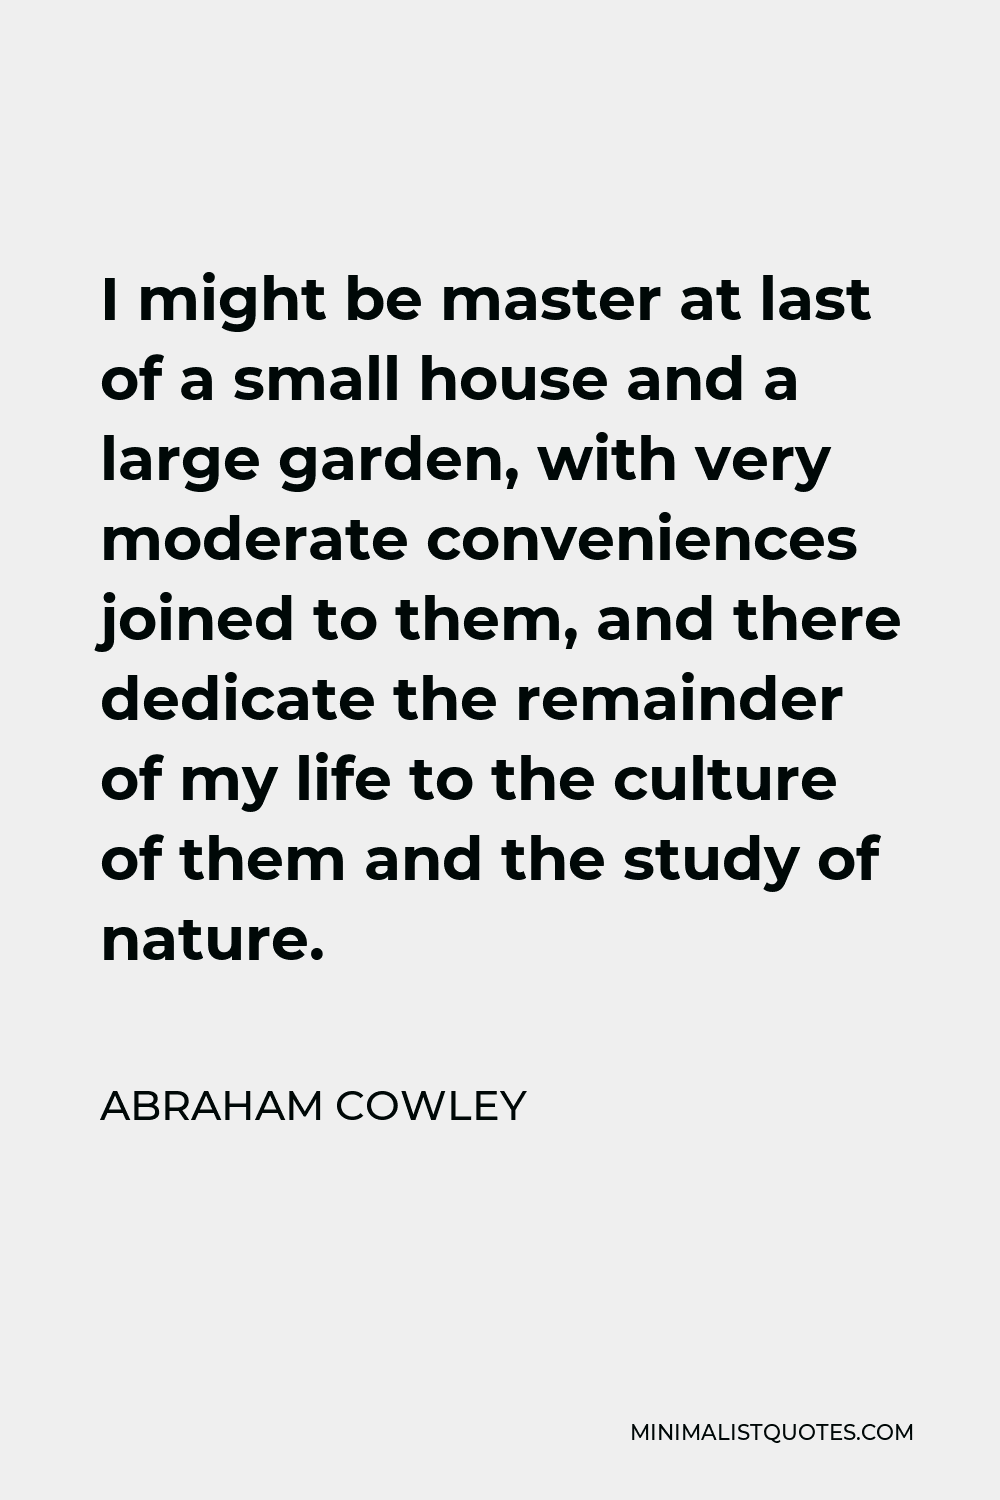 Abraham Cowley Quote - I might be master at last of a small house and a large garden, with very moderate conveniences joined to them, and there dedicate the remainder of my life to the culture of them and the study of nature.